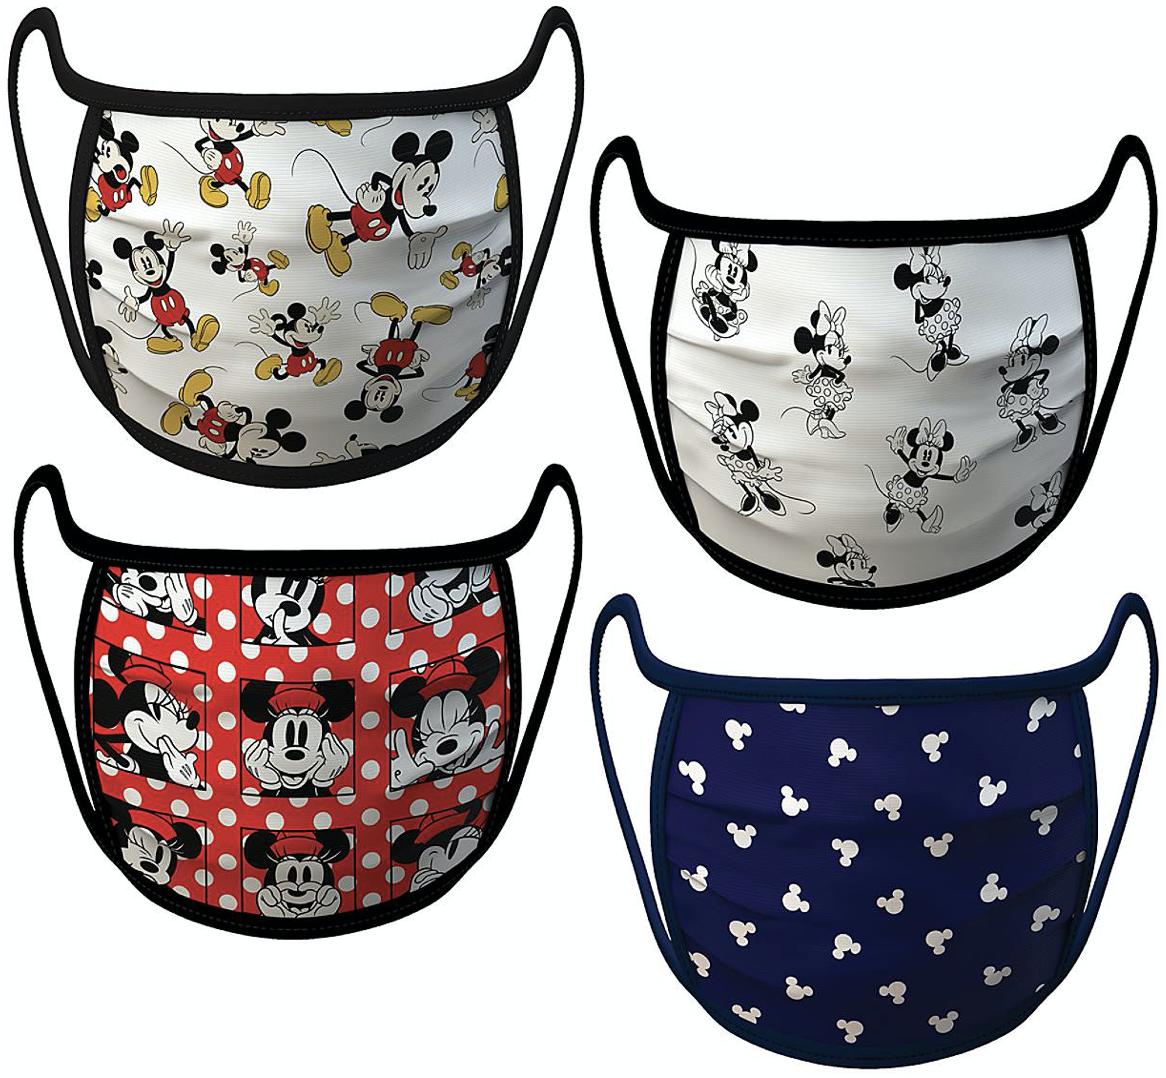 Disney Mickey and Minnie Mouse Cloth Face Masks